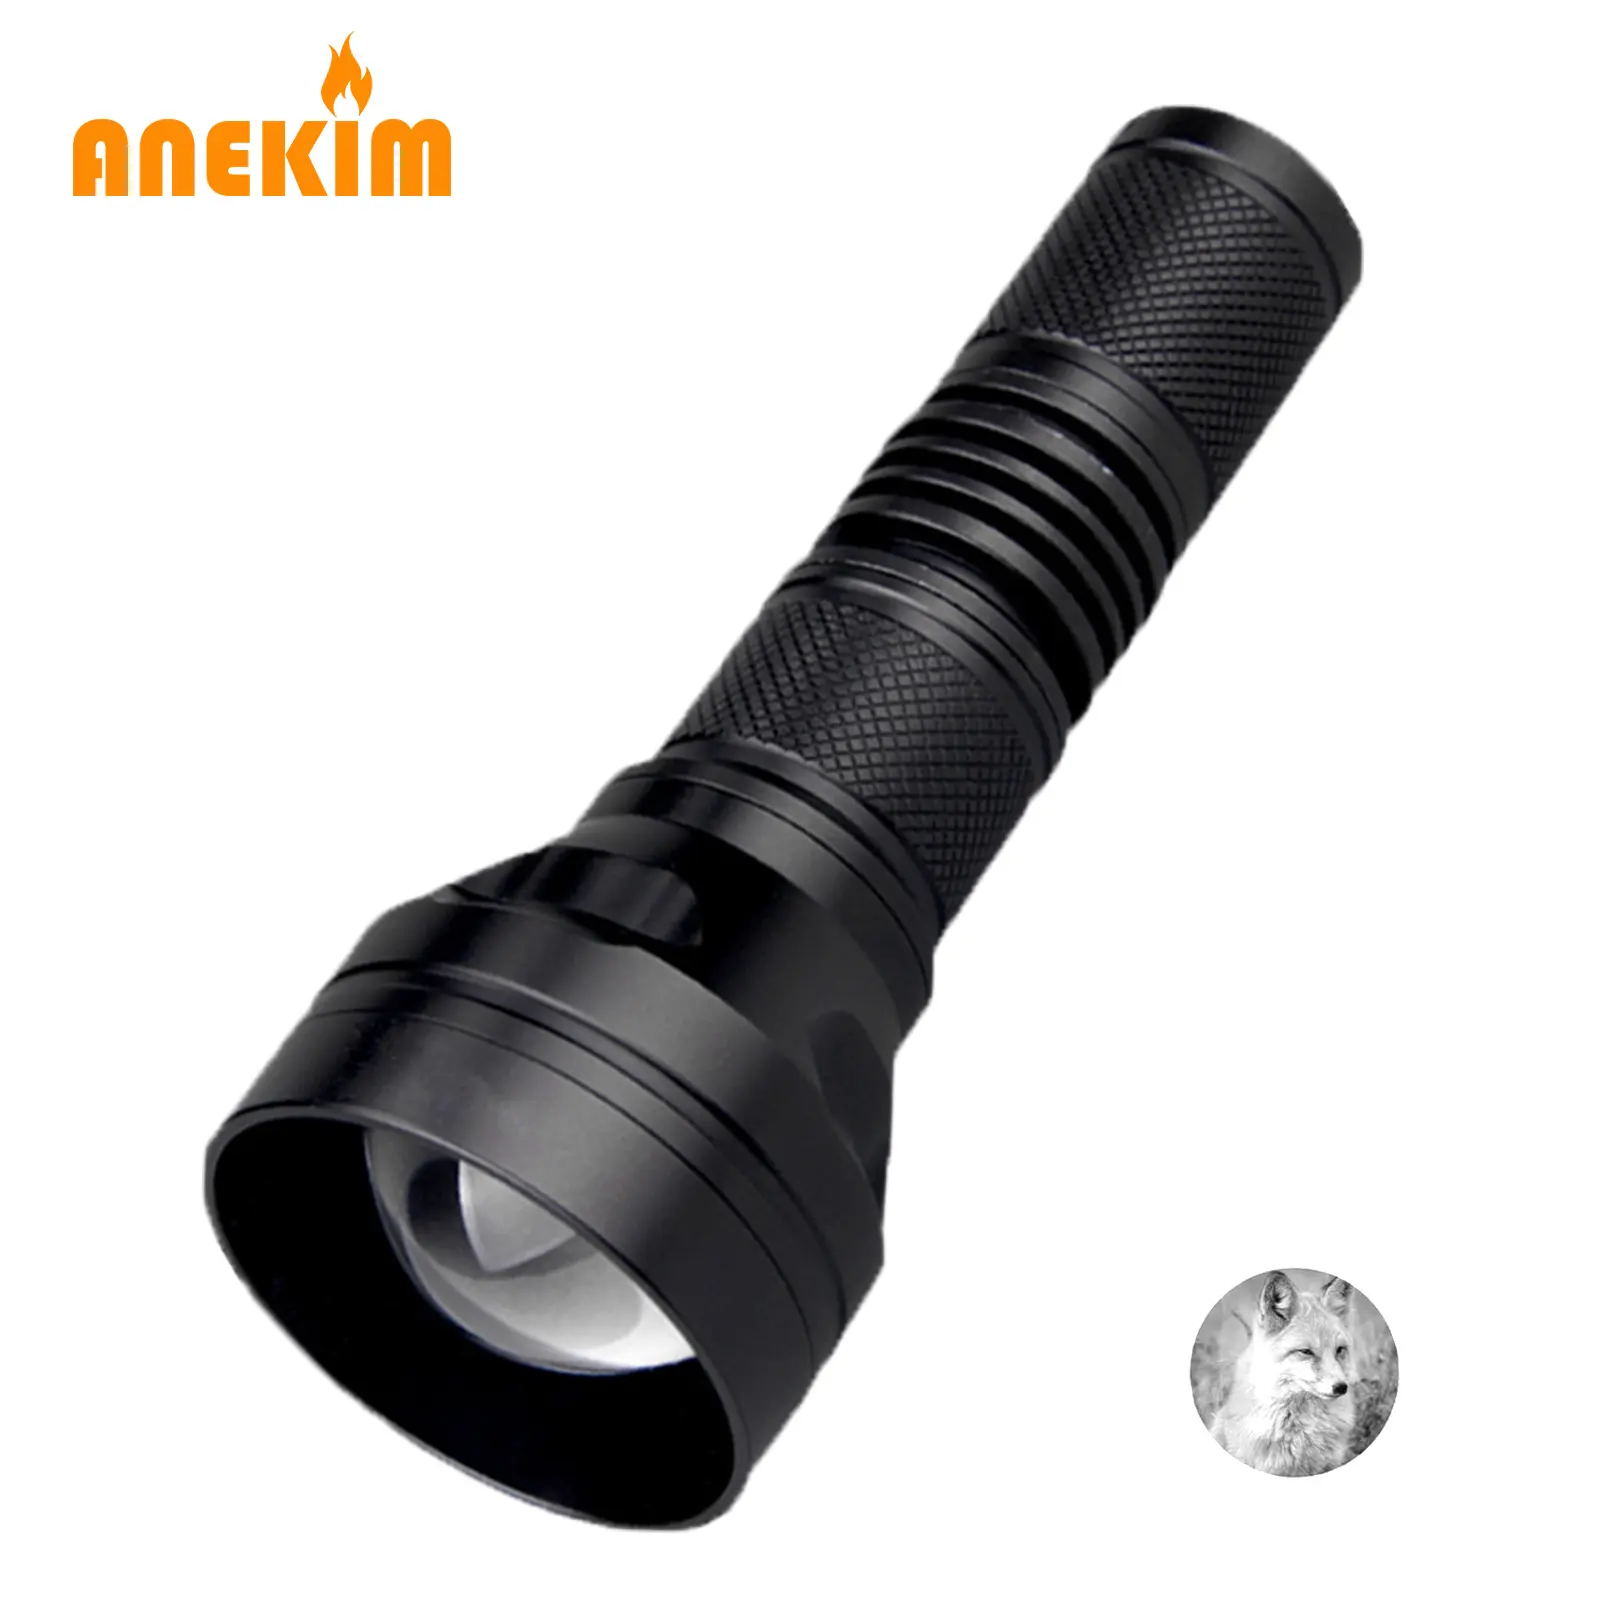 ANEKIM UC50 Zoom Infrared Illuminator VCSELIR940nm Torch for Digital Night Vision USB Rechargeable Powerful Tactical Flashlights